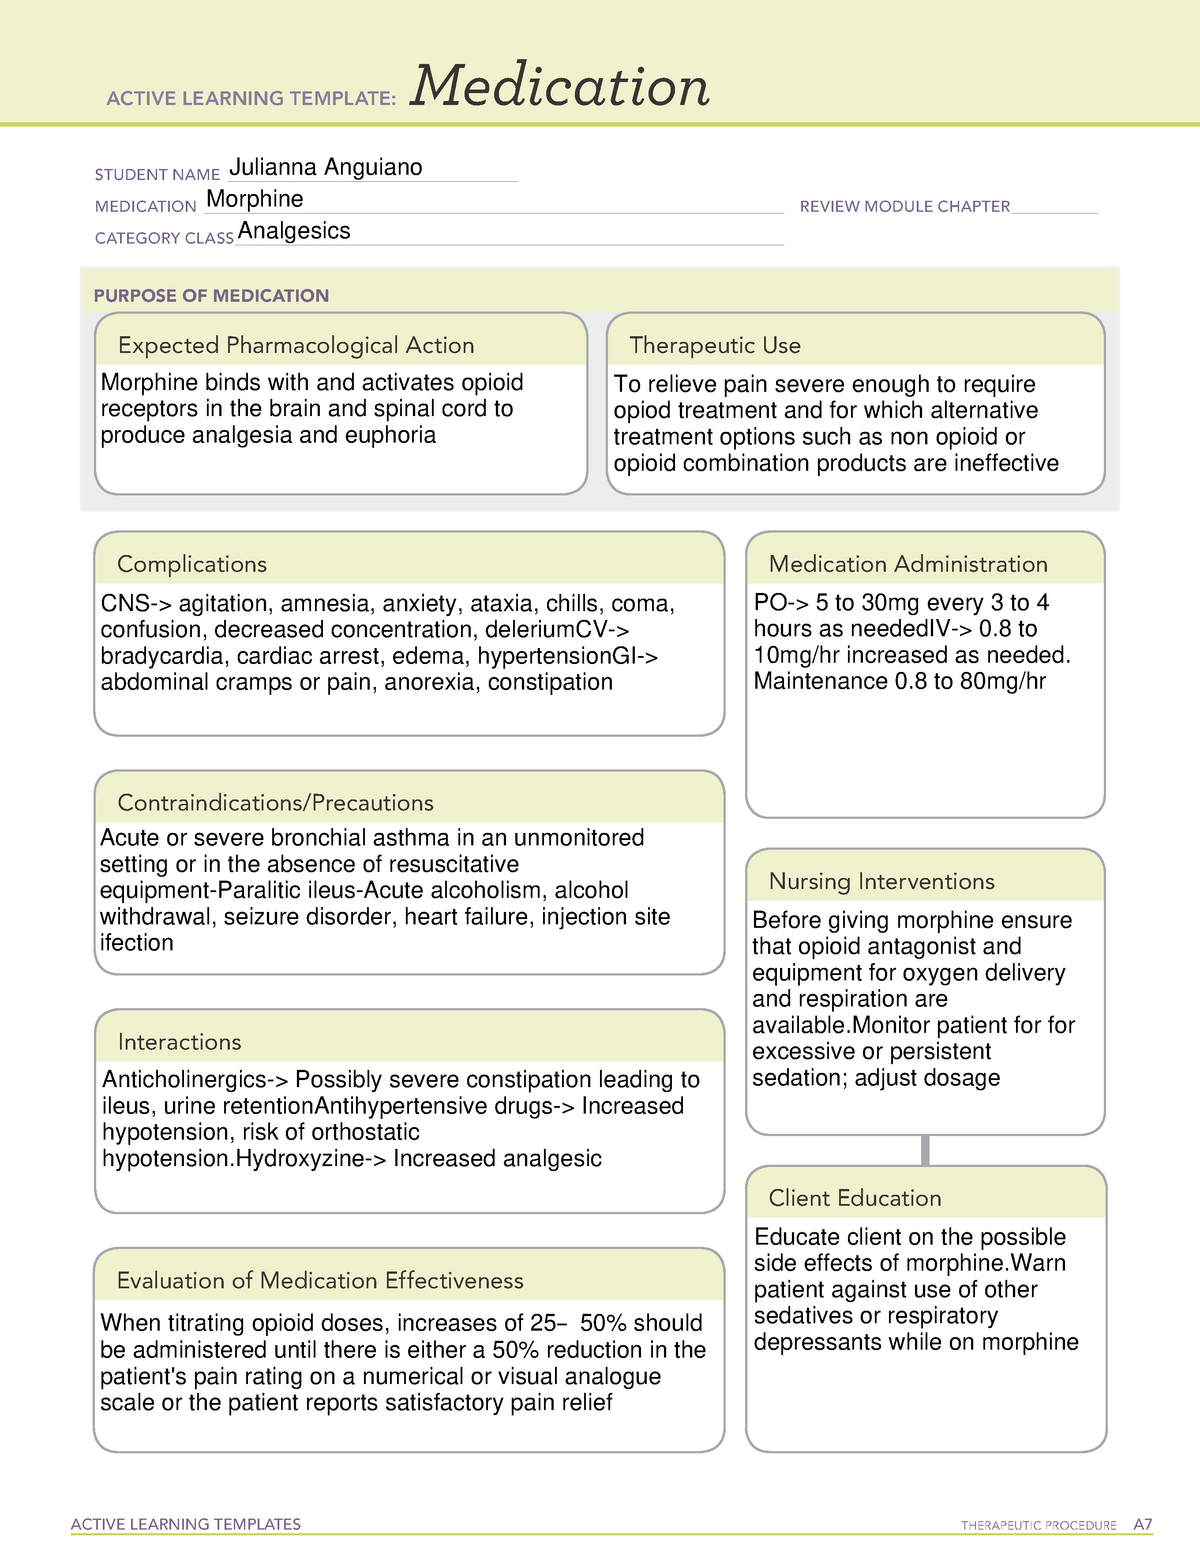 morphine-medication-administration-template-ati-active-learning-templates-therapeutic